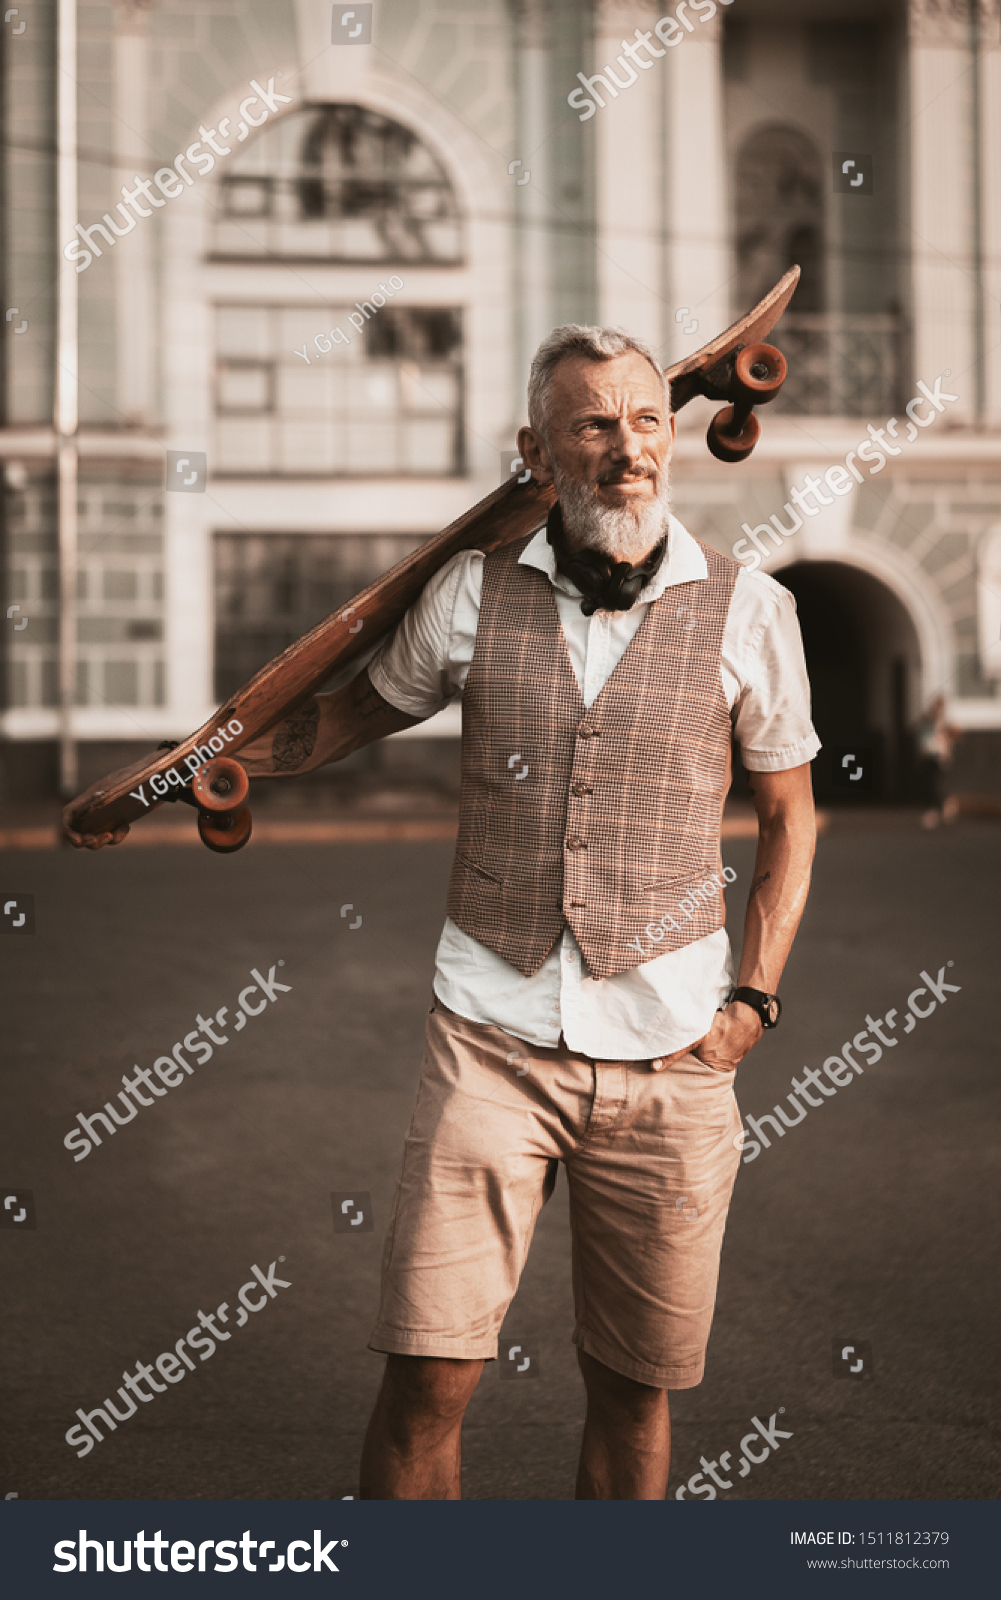 Adult bearded man portrait with longboard. Stylish model in casual clothes ride skateboard on city street background. Outdoors style. Sport lifestyle #1511812379